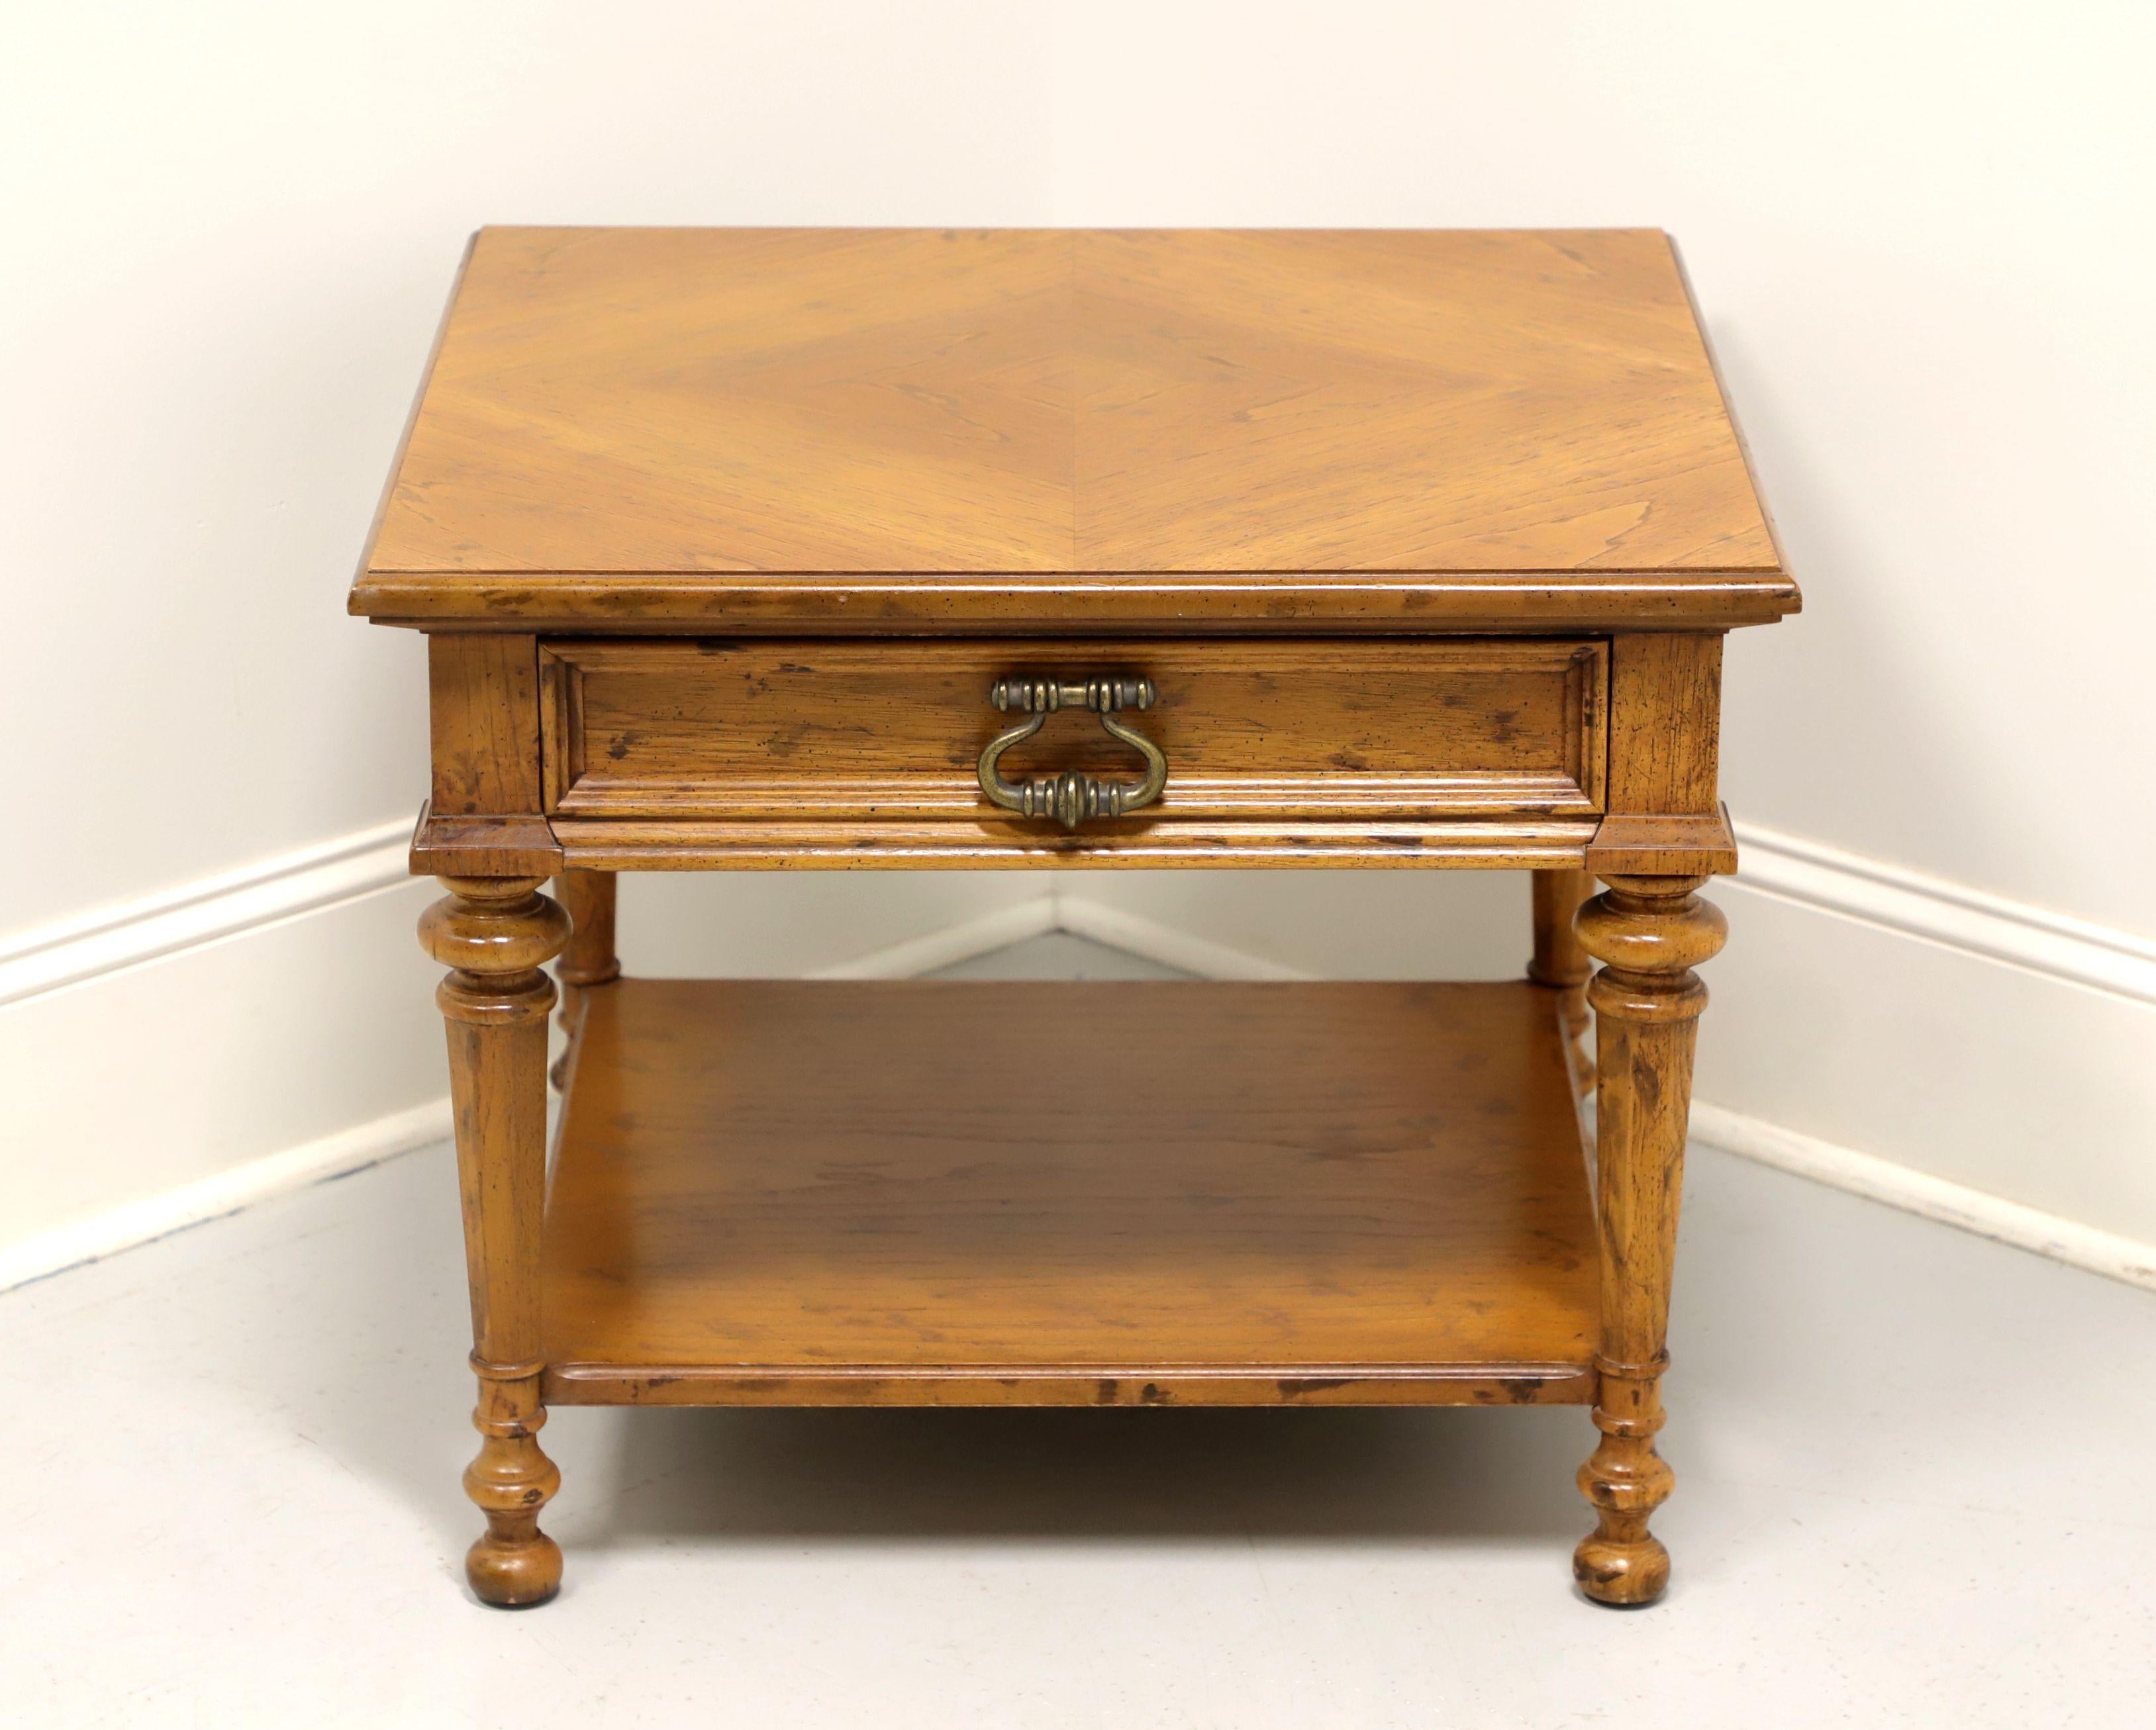 A Spanish style square end table by Drexel, from their Velero Collection. Pecan with distressed finish, parquetry top, undertier shelf and turned legs. Features one drawer of dovetail construction. Made in North Carolina, USA, circa 1969.

Style